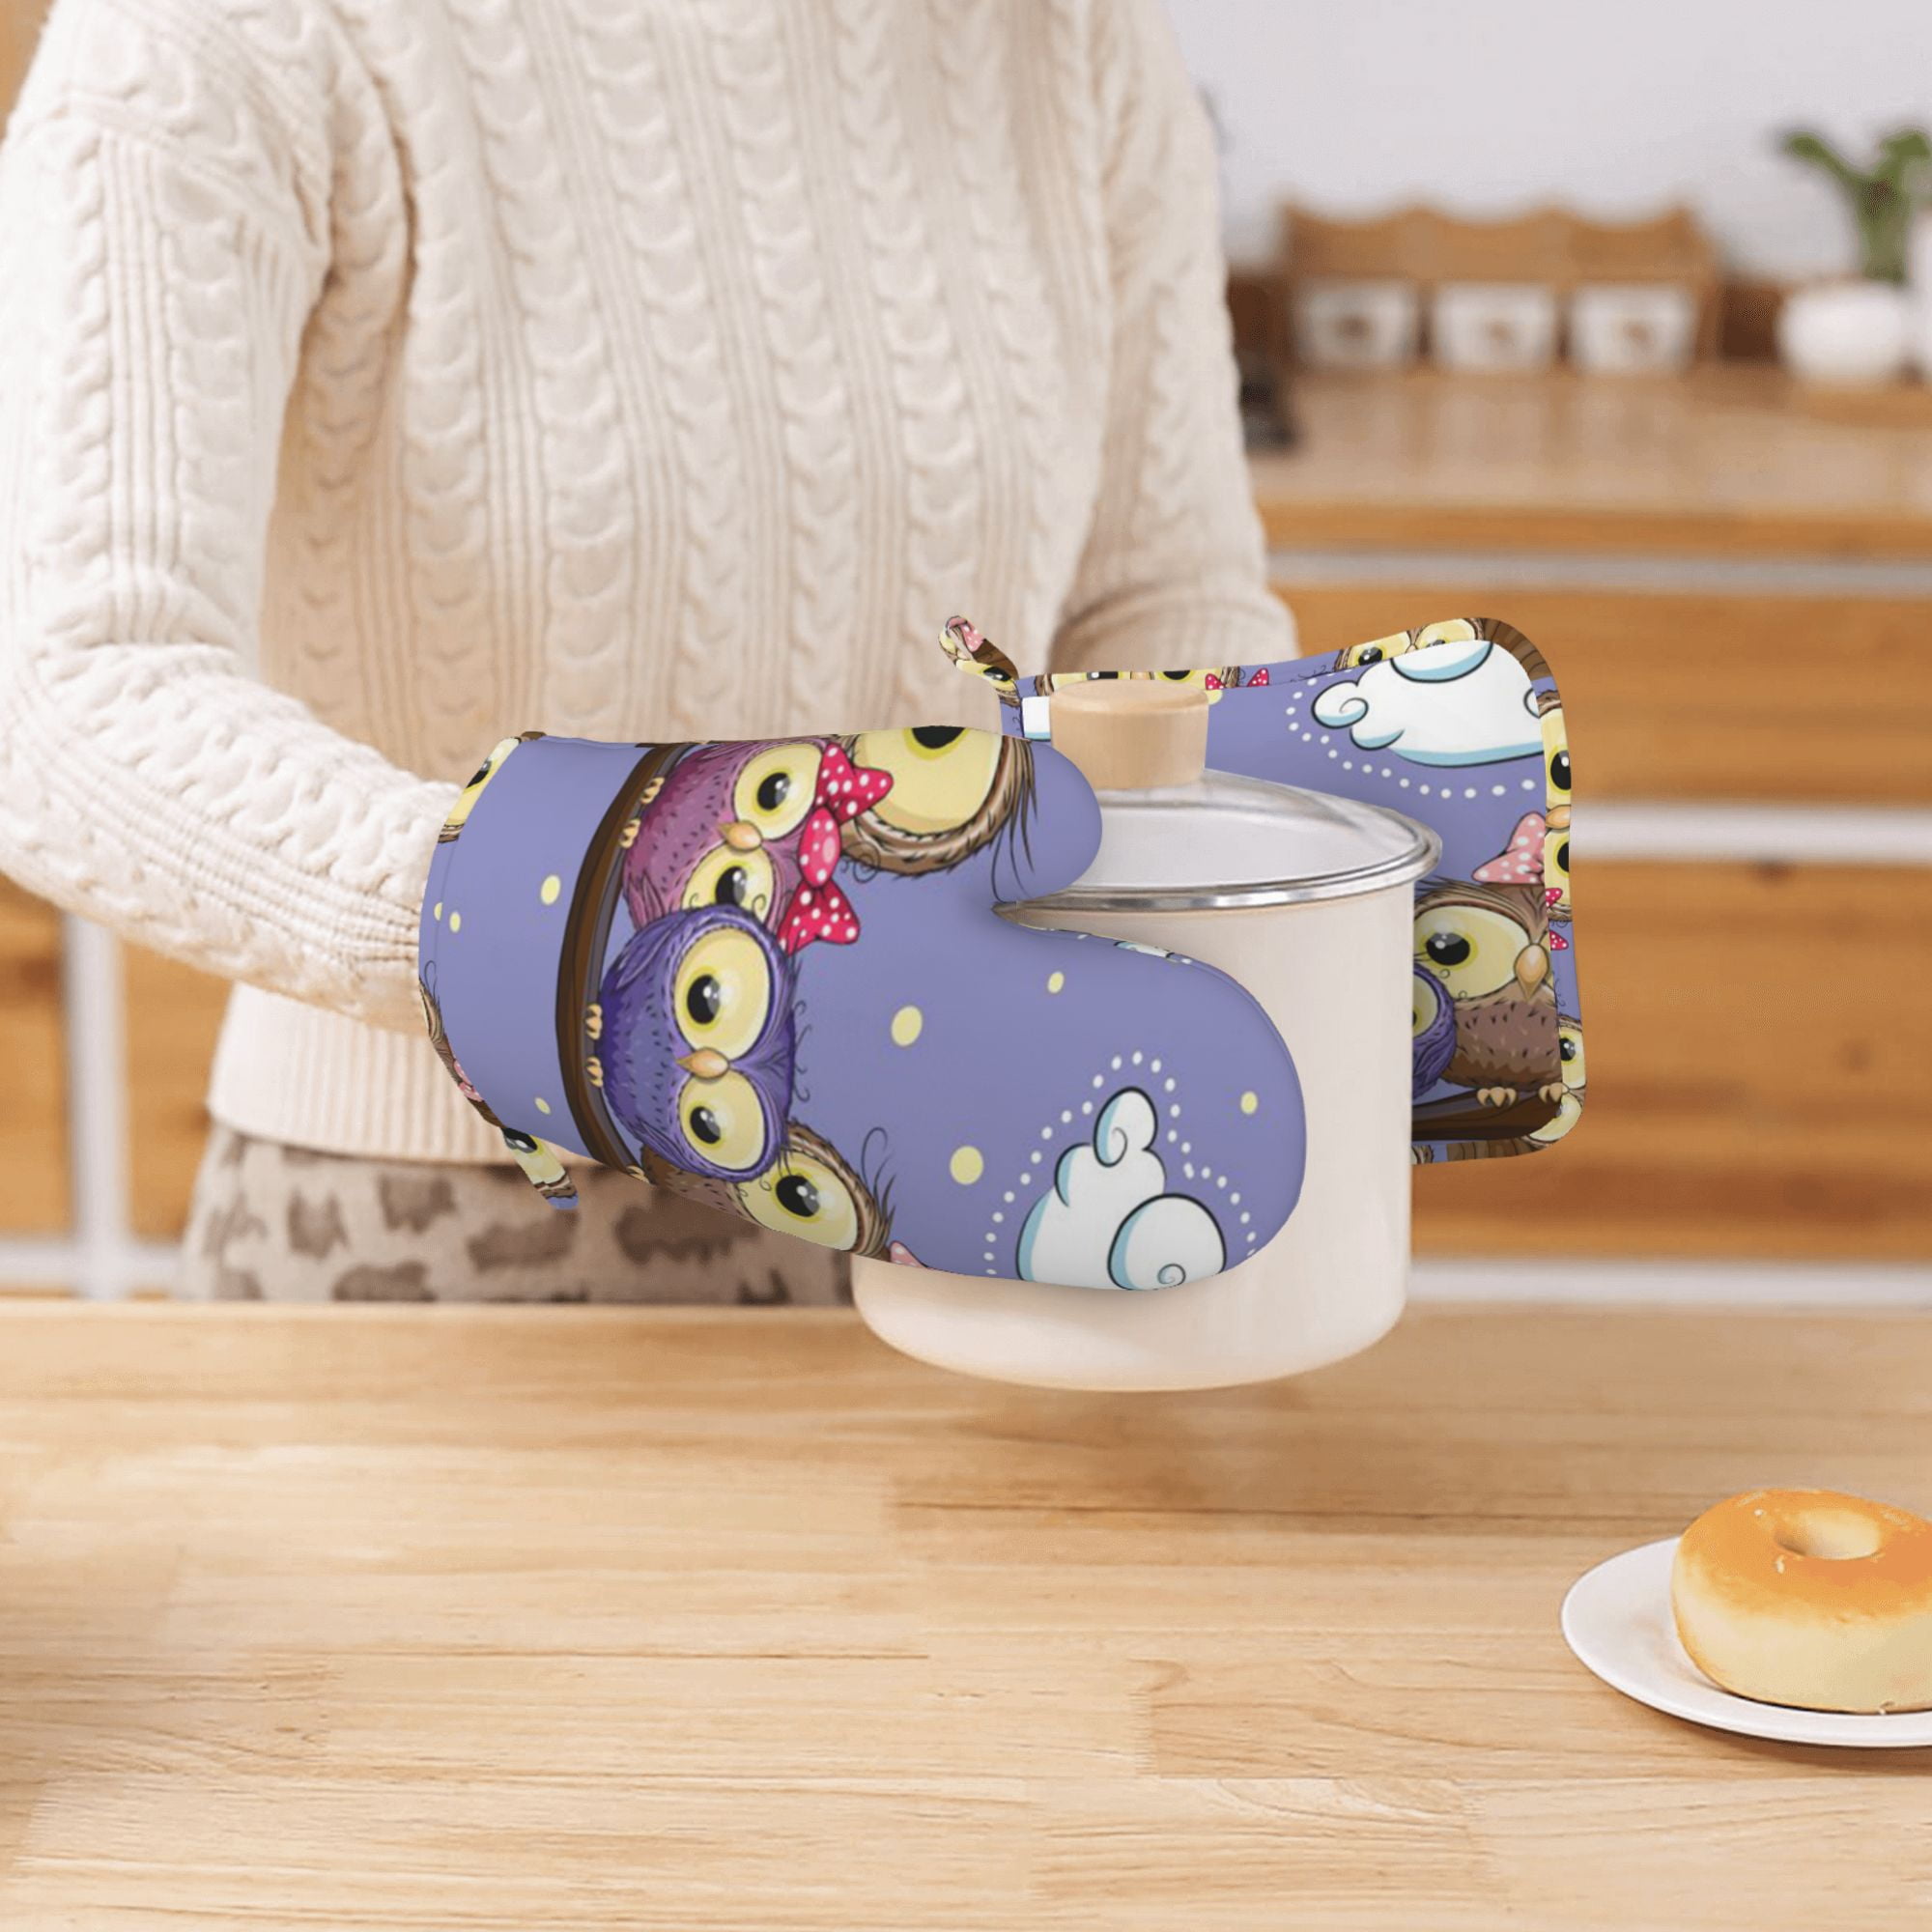 Kitchen Oven Mitts and Pot Holders Sets,The Pioneer Woman Flower Bird Print  Oven Gloves and Potholders,Heat-Resistant Oven Gloves and Hot Pads,Pioneer